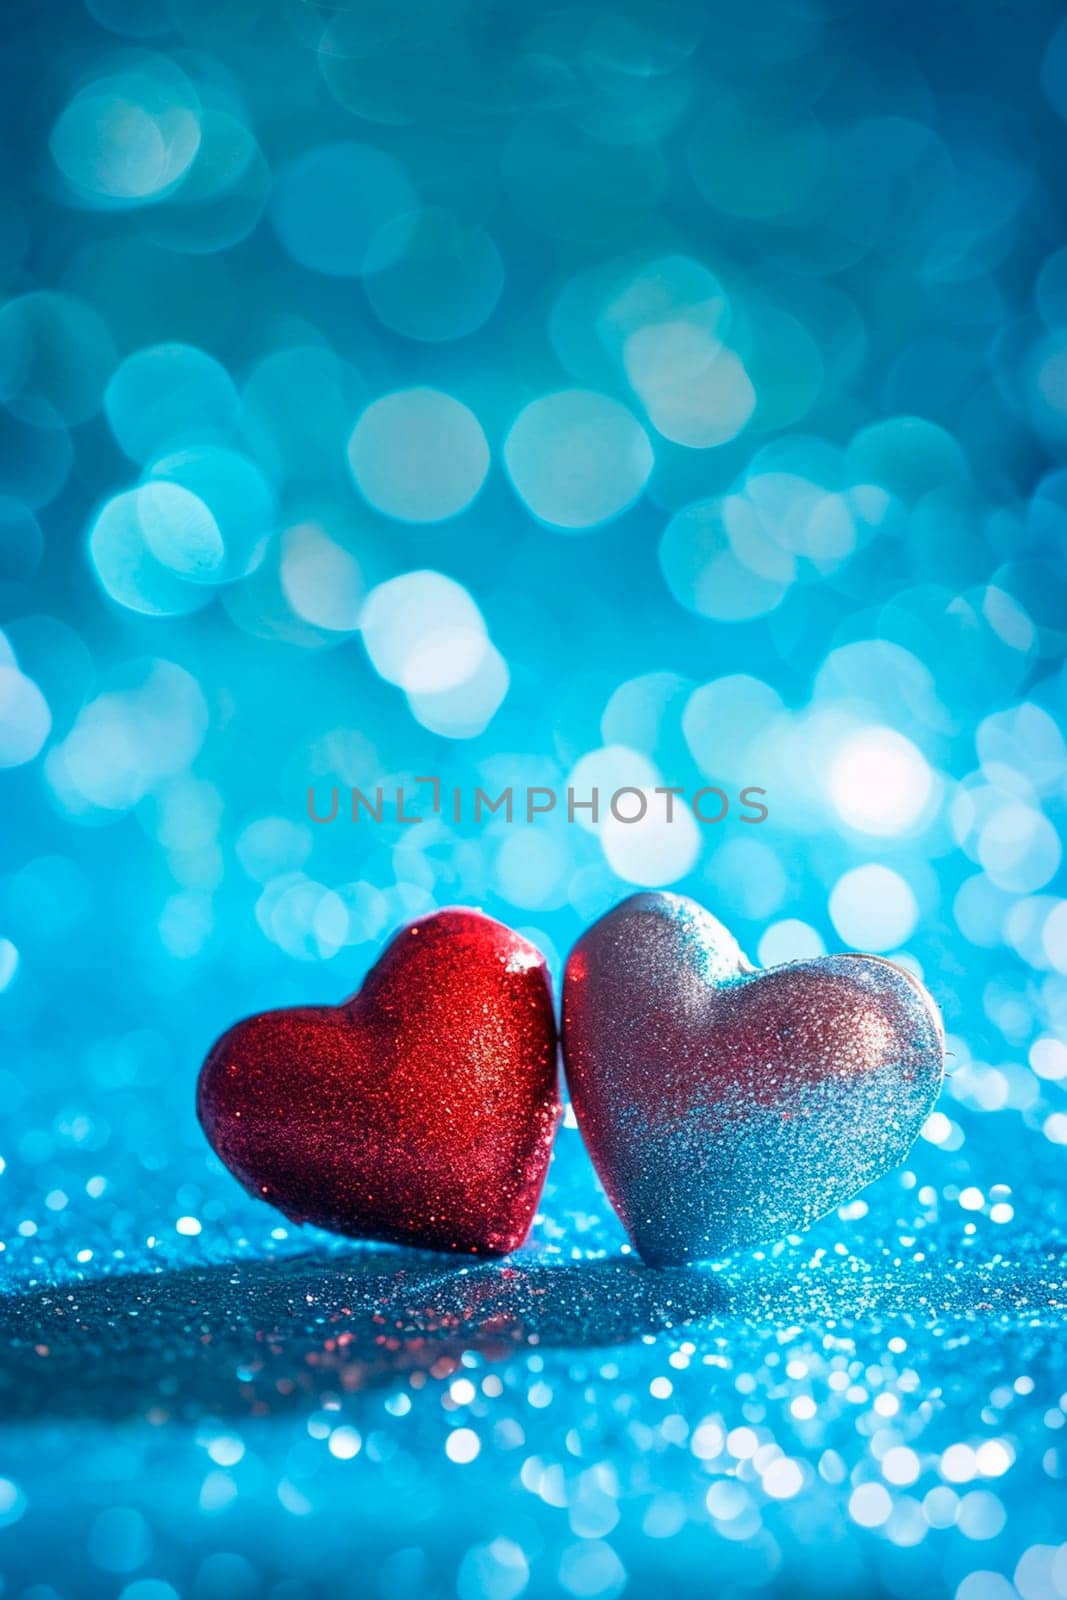 Hearts on a shiny background for Valentine's Day. Selective focus. by yanadjana